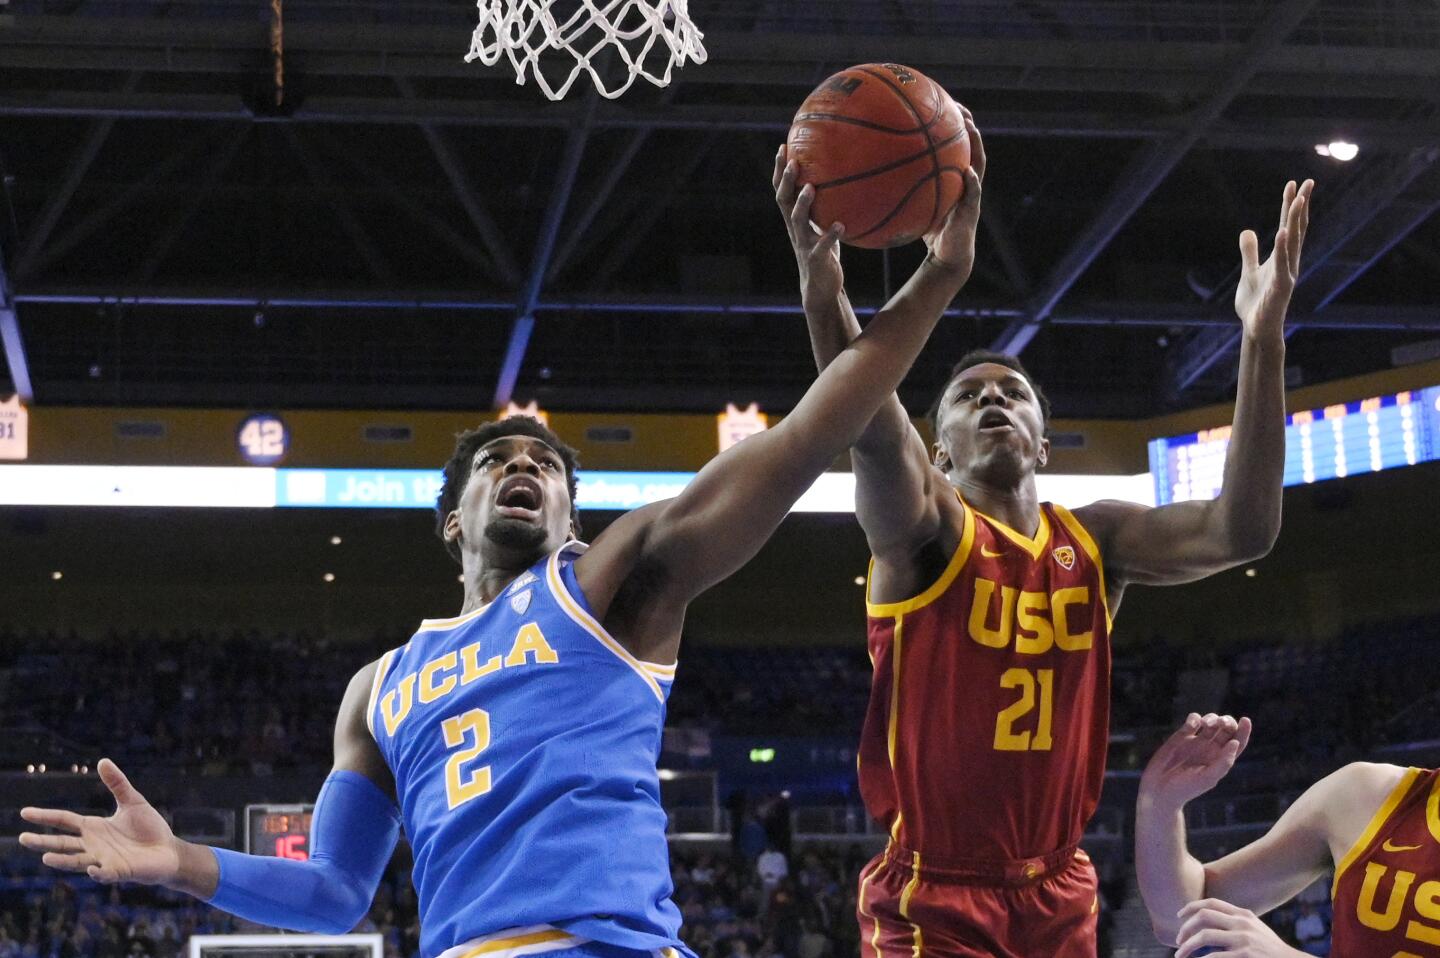 UCLA forward Cody Riley and USC forward Onyeka Okongwu reach for a rebound during the first half of a game Jan. 11 at Pauley Pavilion.